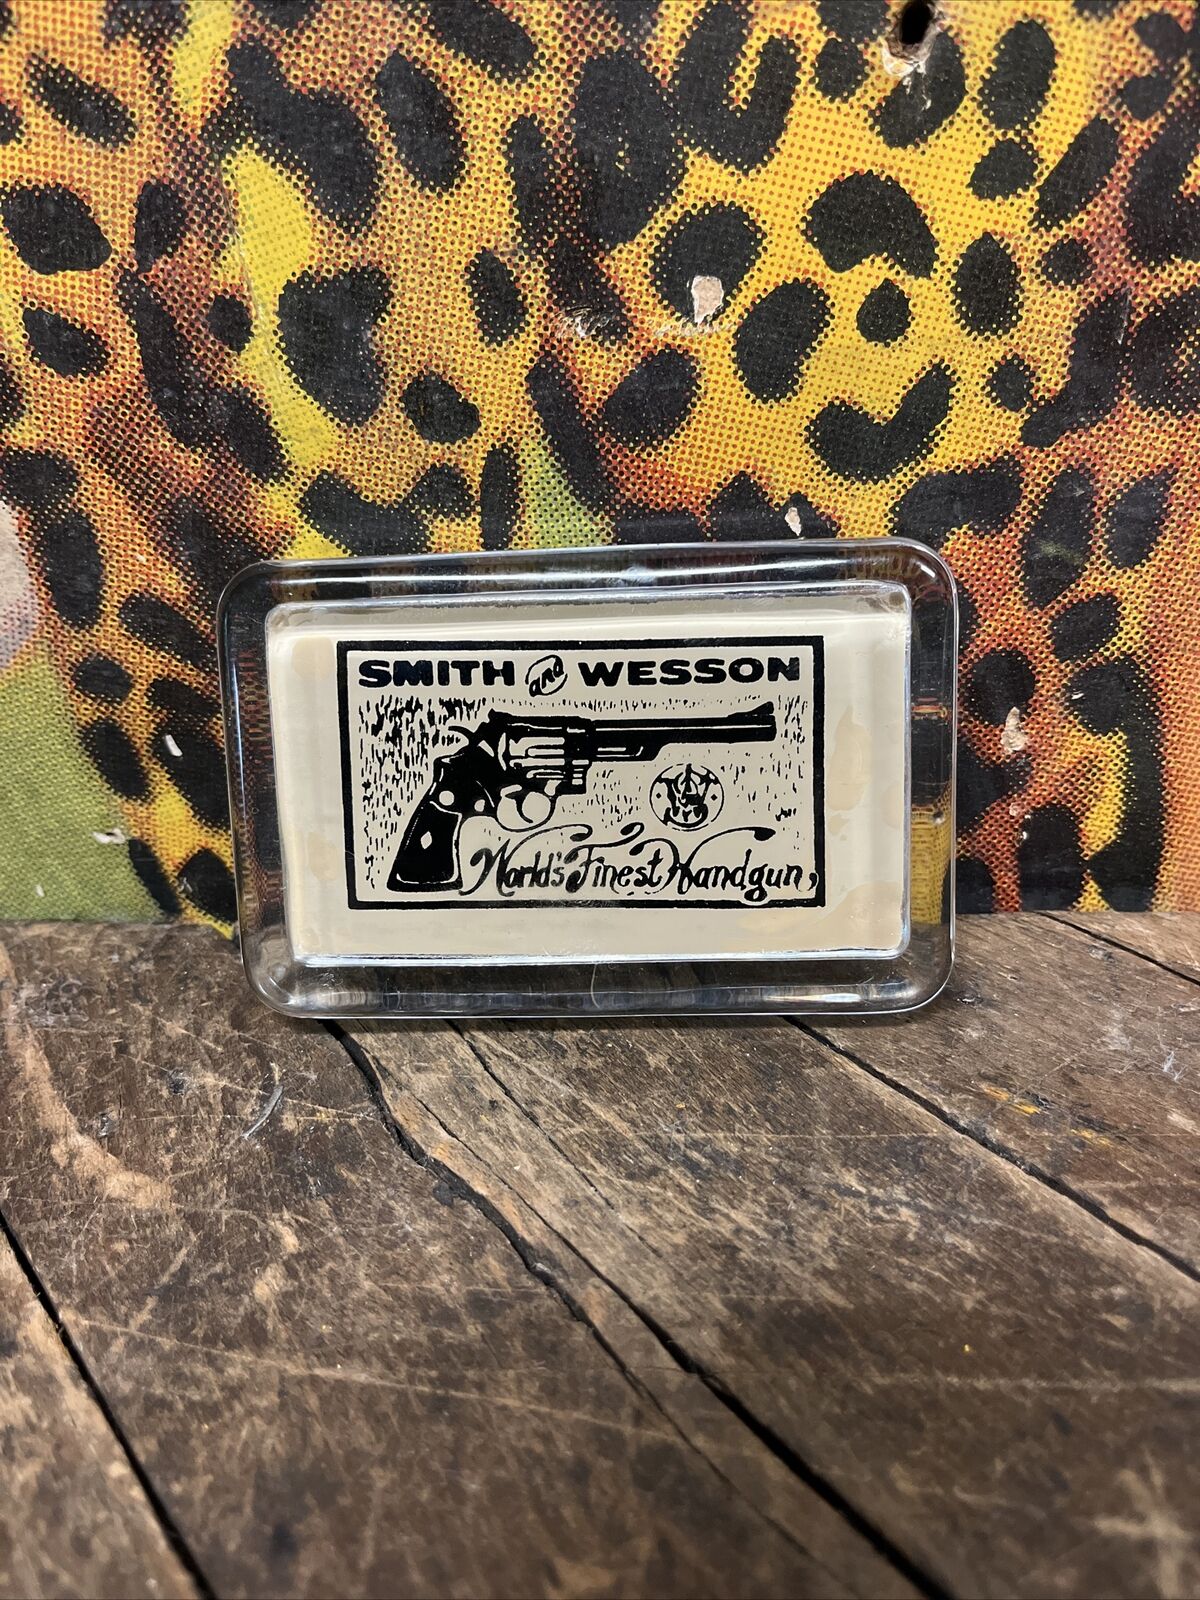 VINTAGE 1957 SMITH AND WESSON HANDGUN GLASS PAPERWEIGHT SIGN FIREARMS RARE